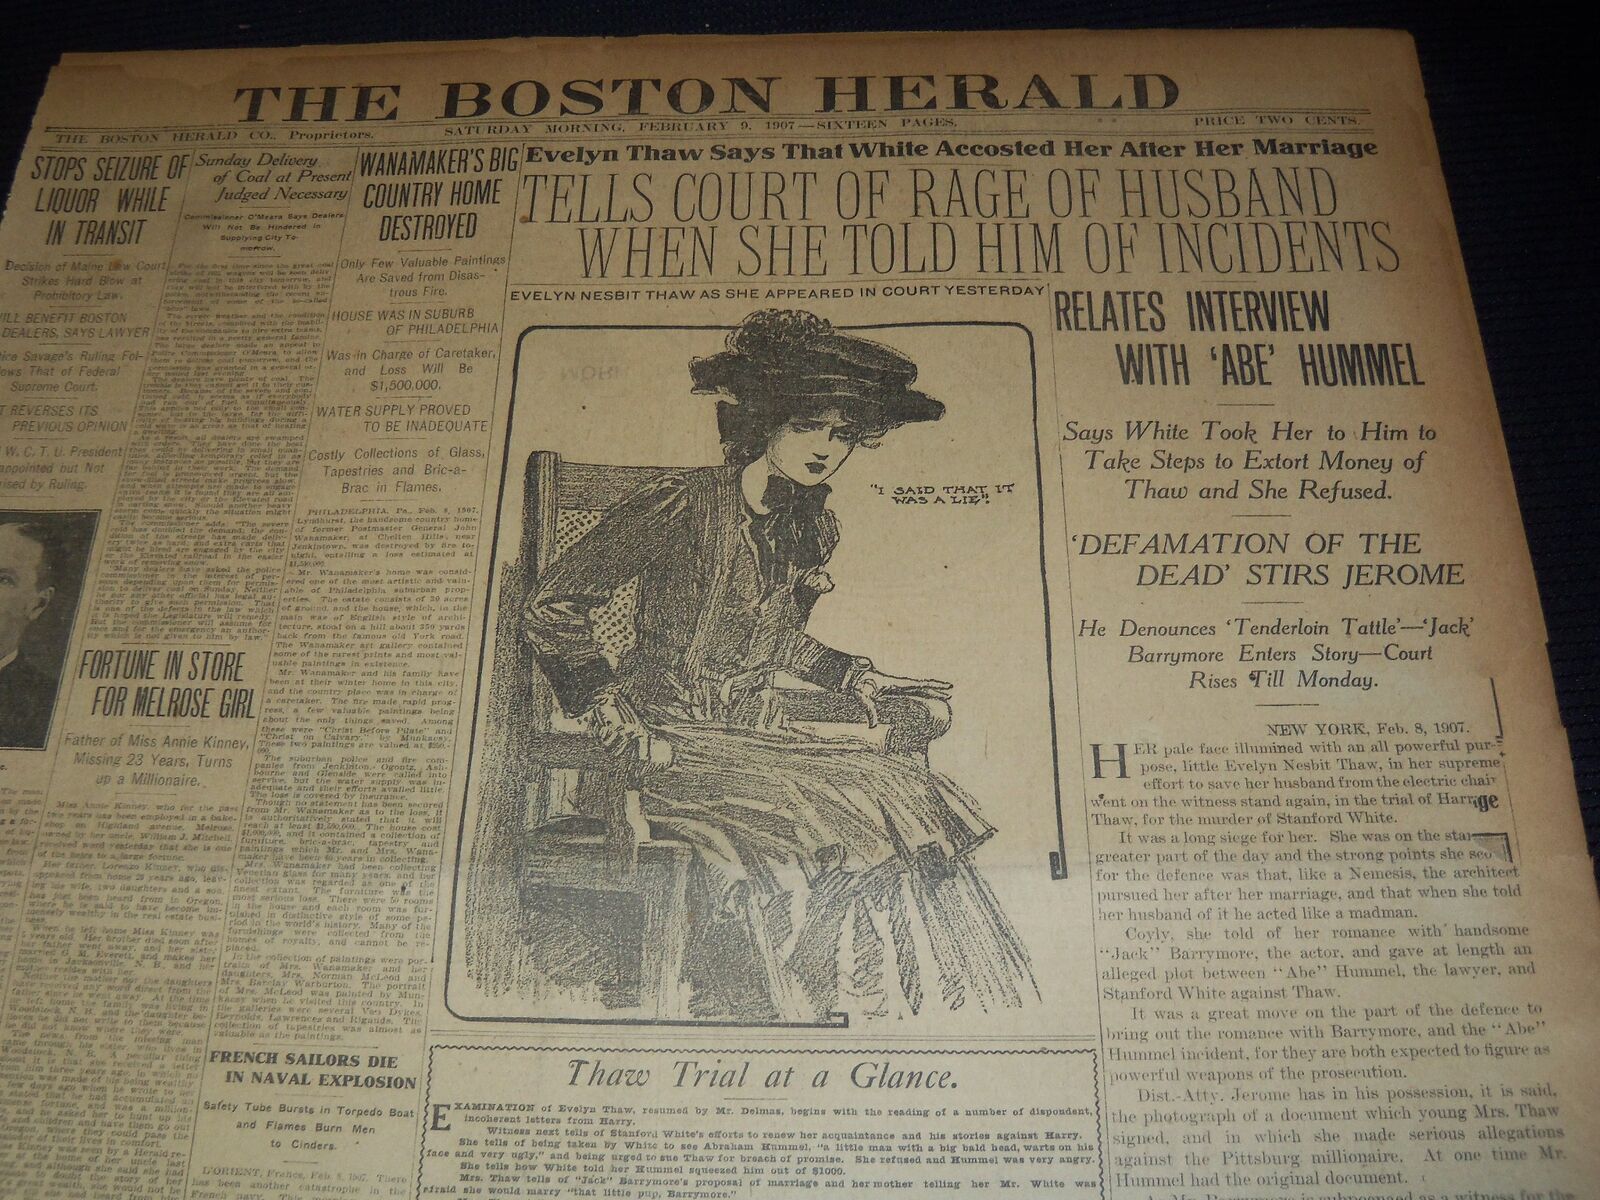 1907 FEB 9 THE BOSTON HERALD - EVELYN THAW TELLS COURT OF RAGE OF HUSBAND- BH 34